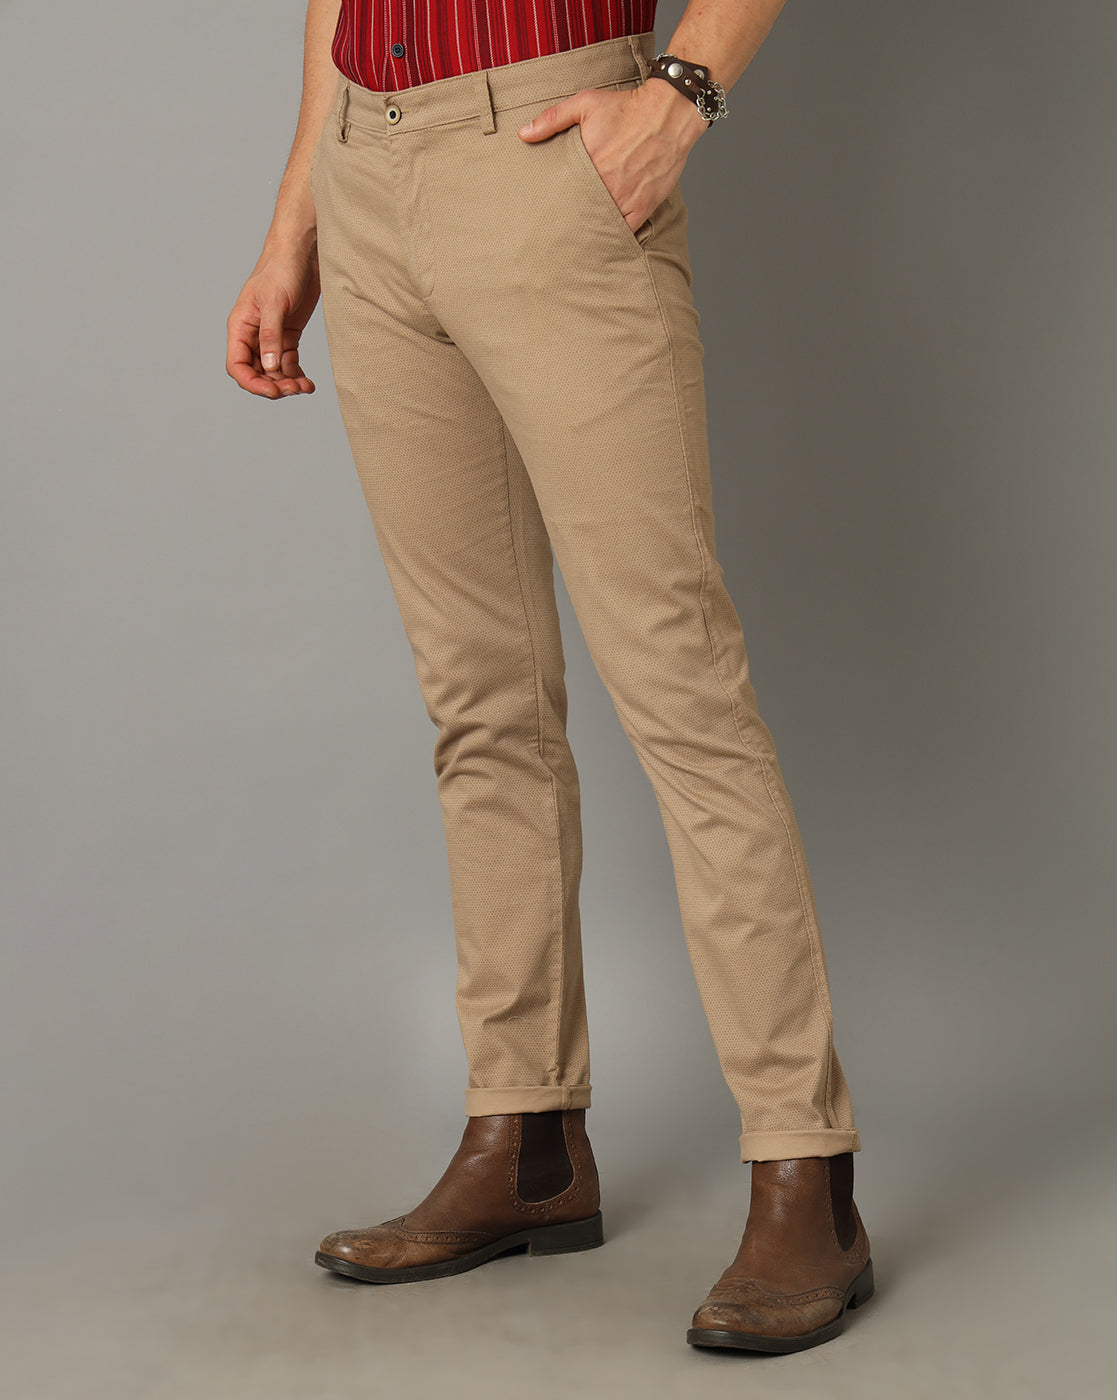 Classic Polo Men's 100% Cotton Moderate Fit Solid Beige Color Trouser | TO1-33 A-BEG